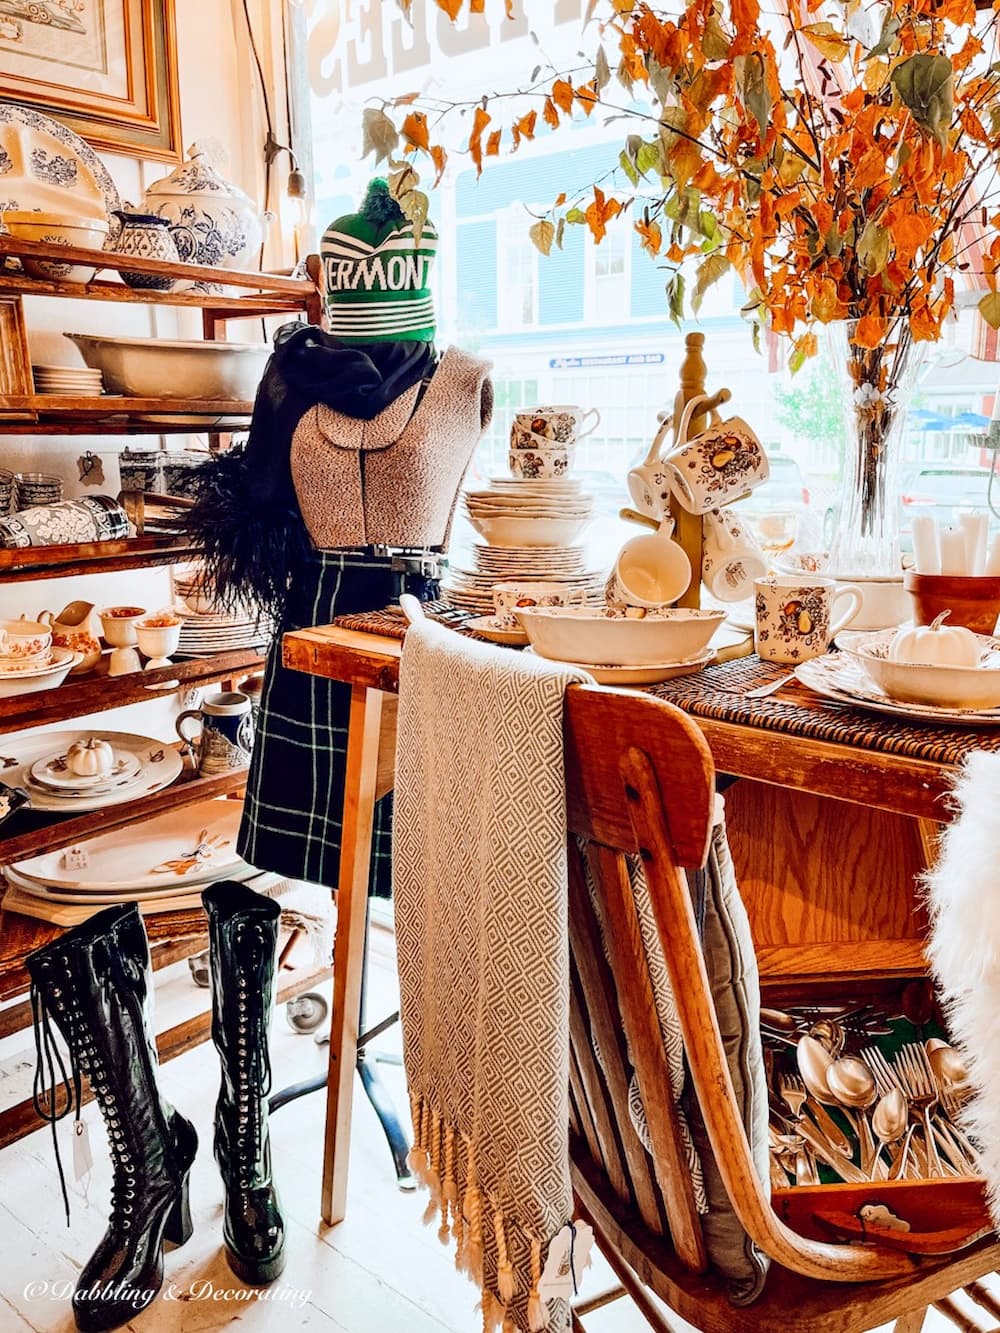 10 Irresistible Antique Bargain Finds Thrifting with the Gals